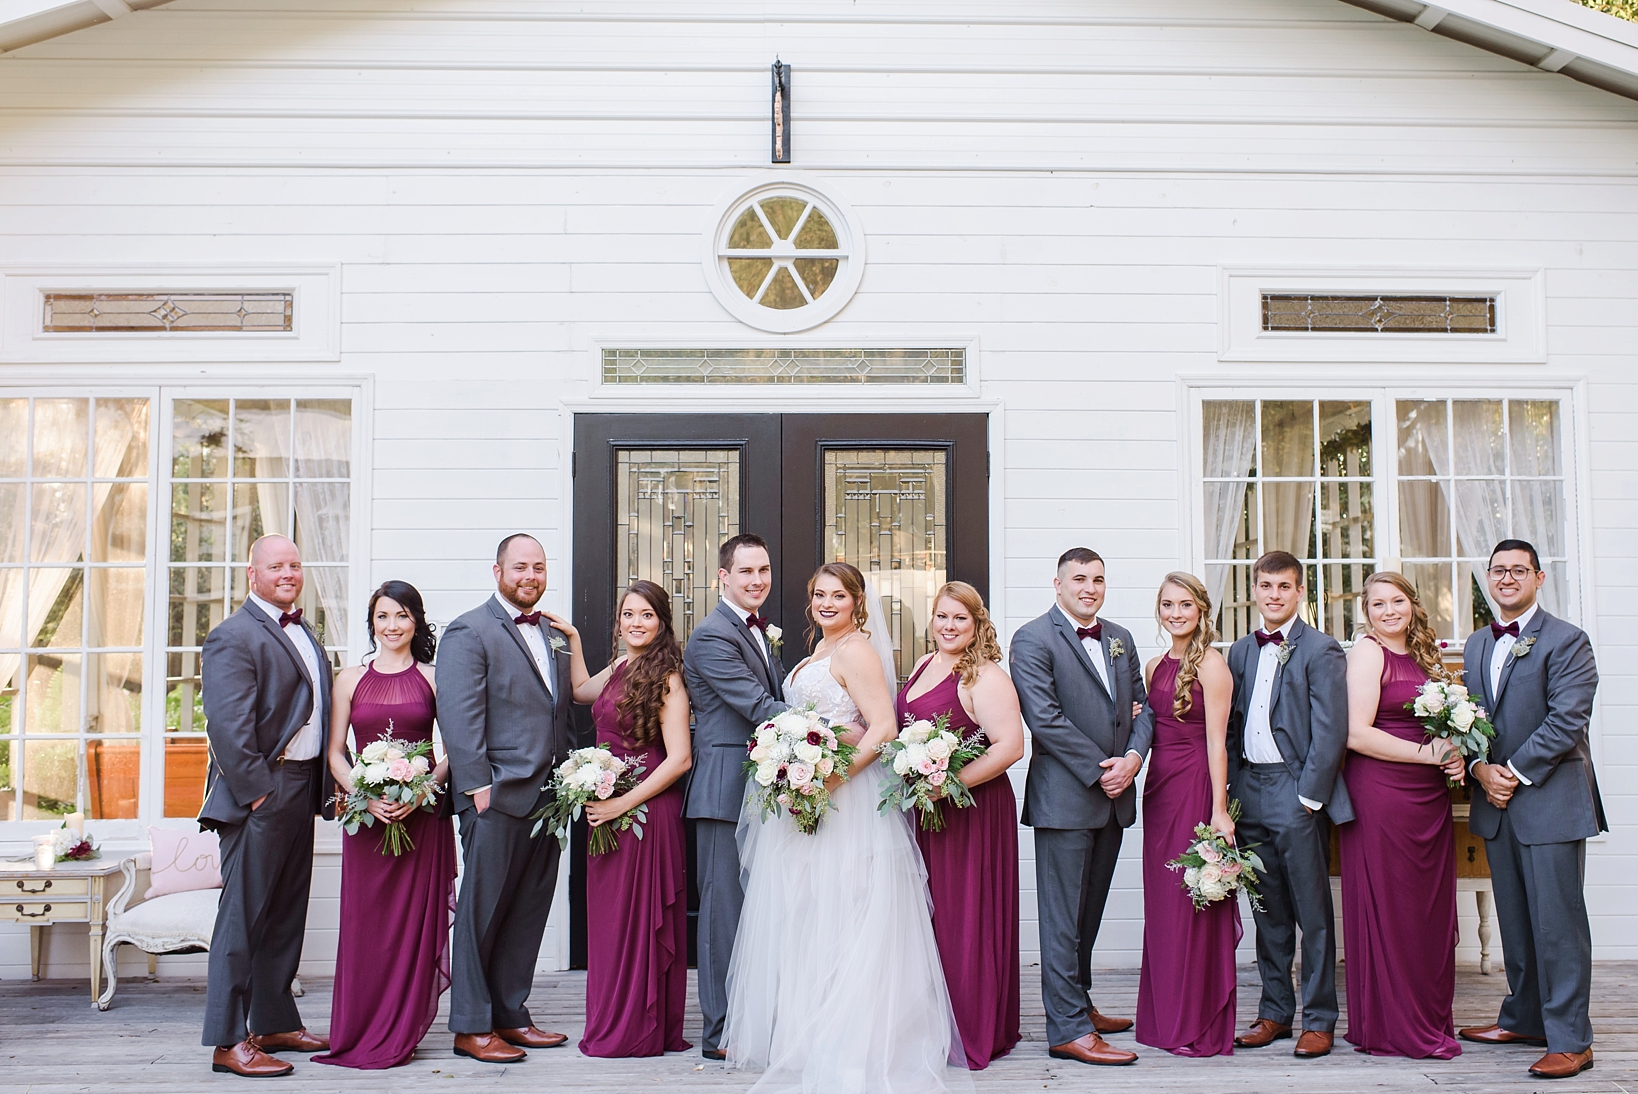 Full bridal party on the front porch of the open air chapel in Seffner ,Fl by Sarah & Ben Photography